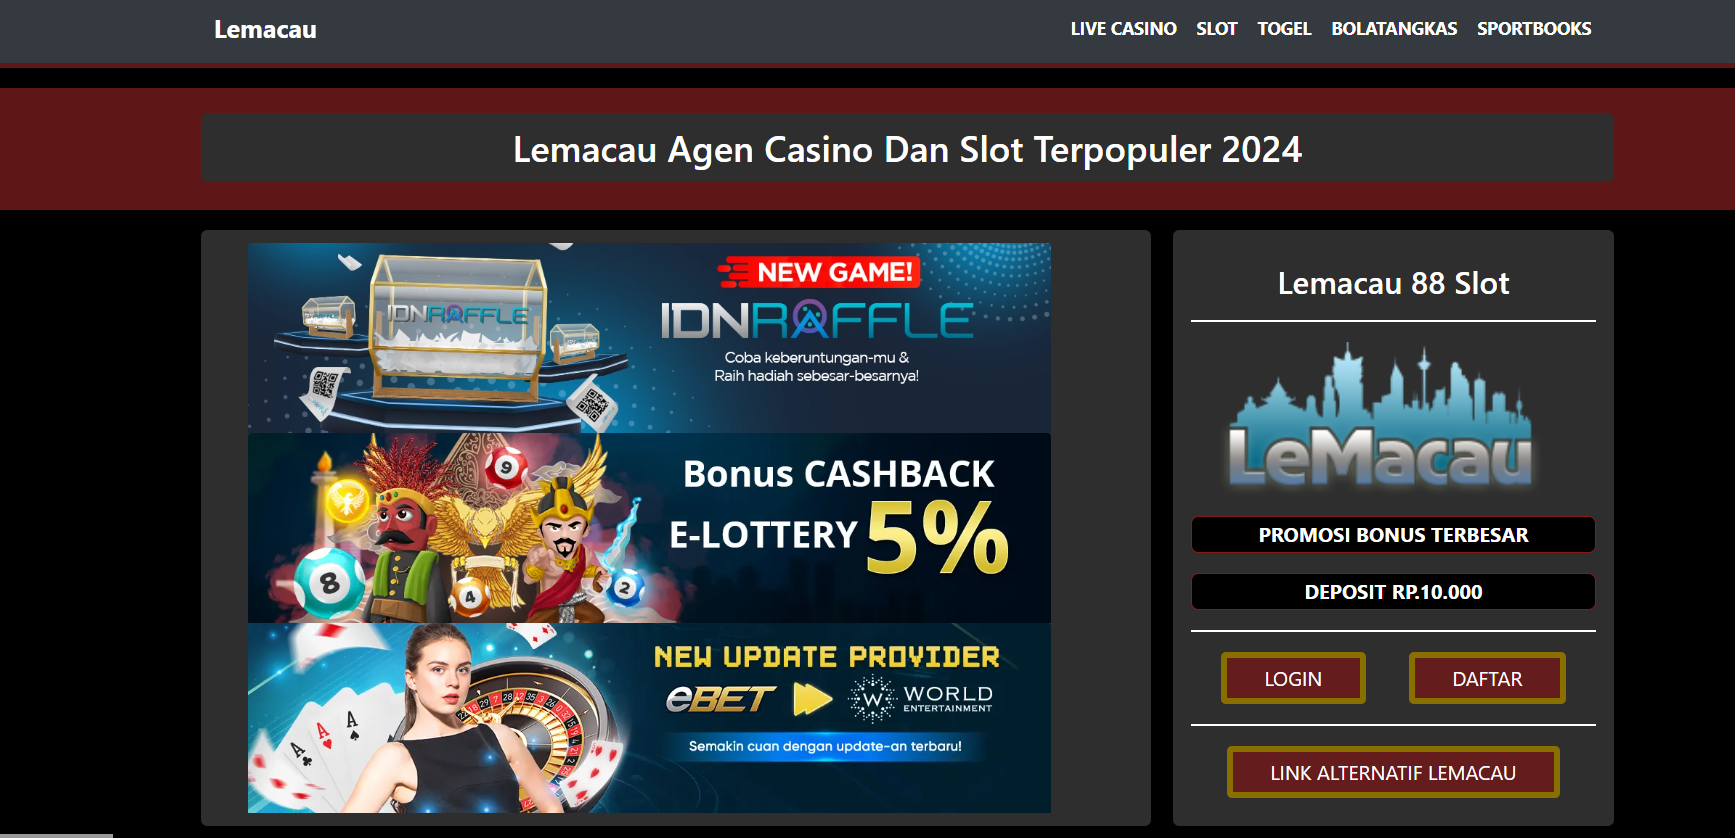 Digital Delight: The Convenience of Online Gambling Unveiled